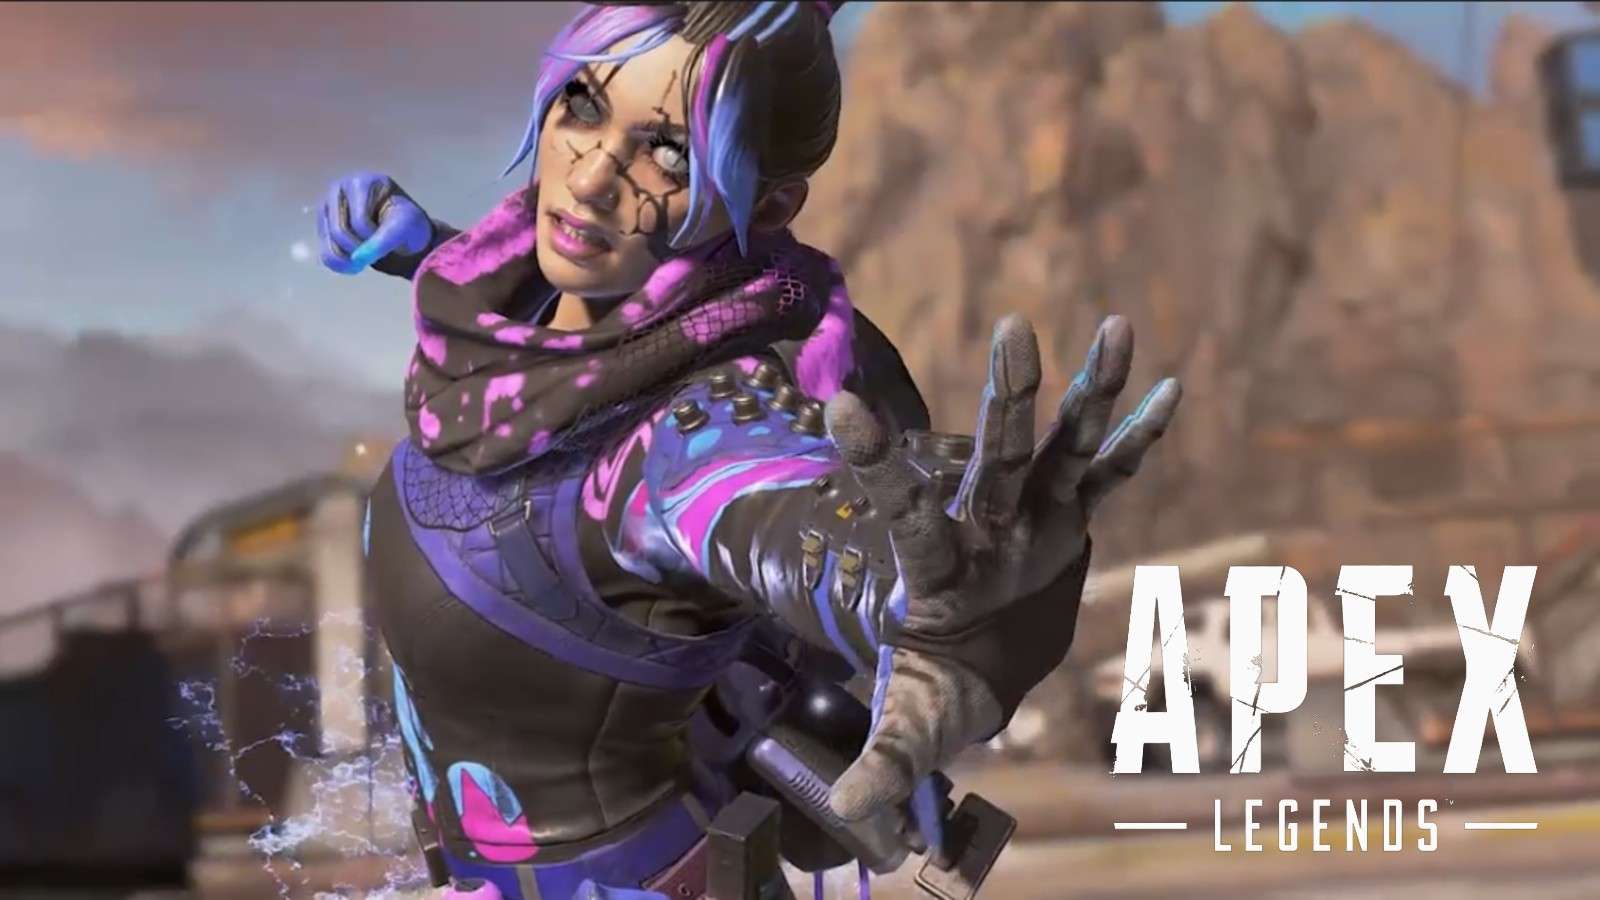 Wraith in Apex Legends attempting a finisher